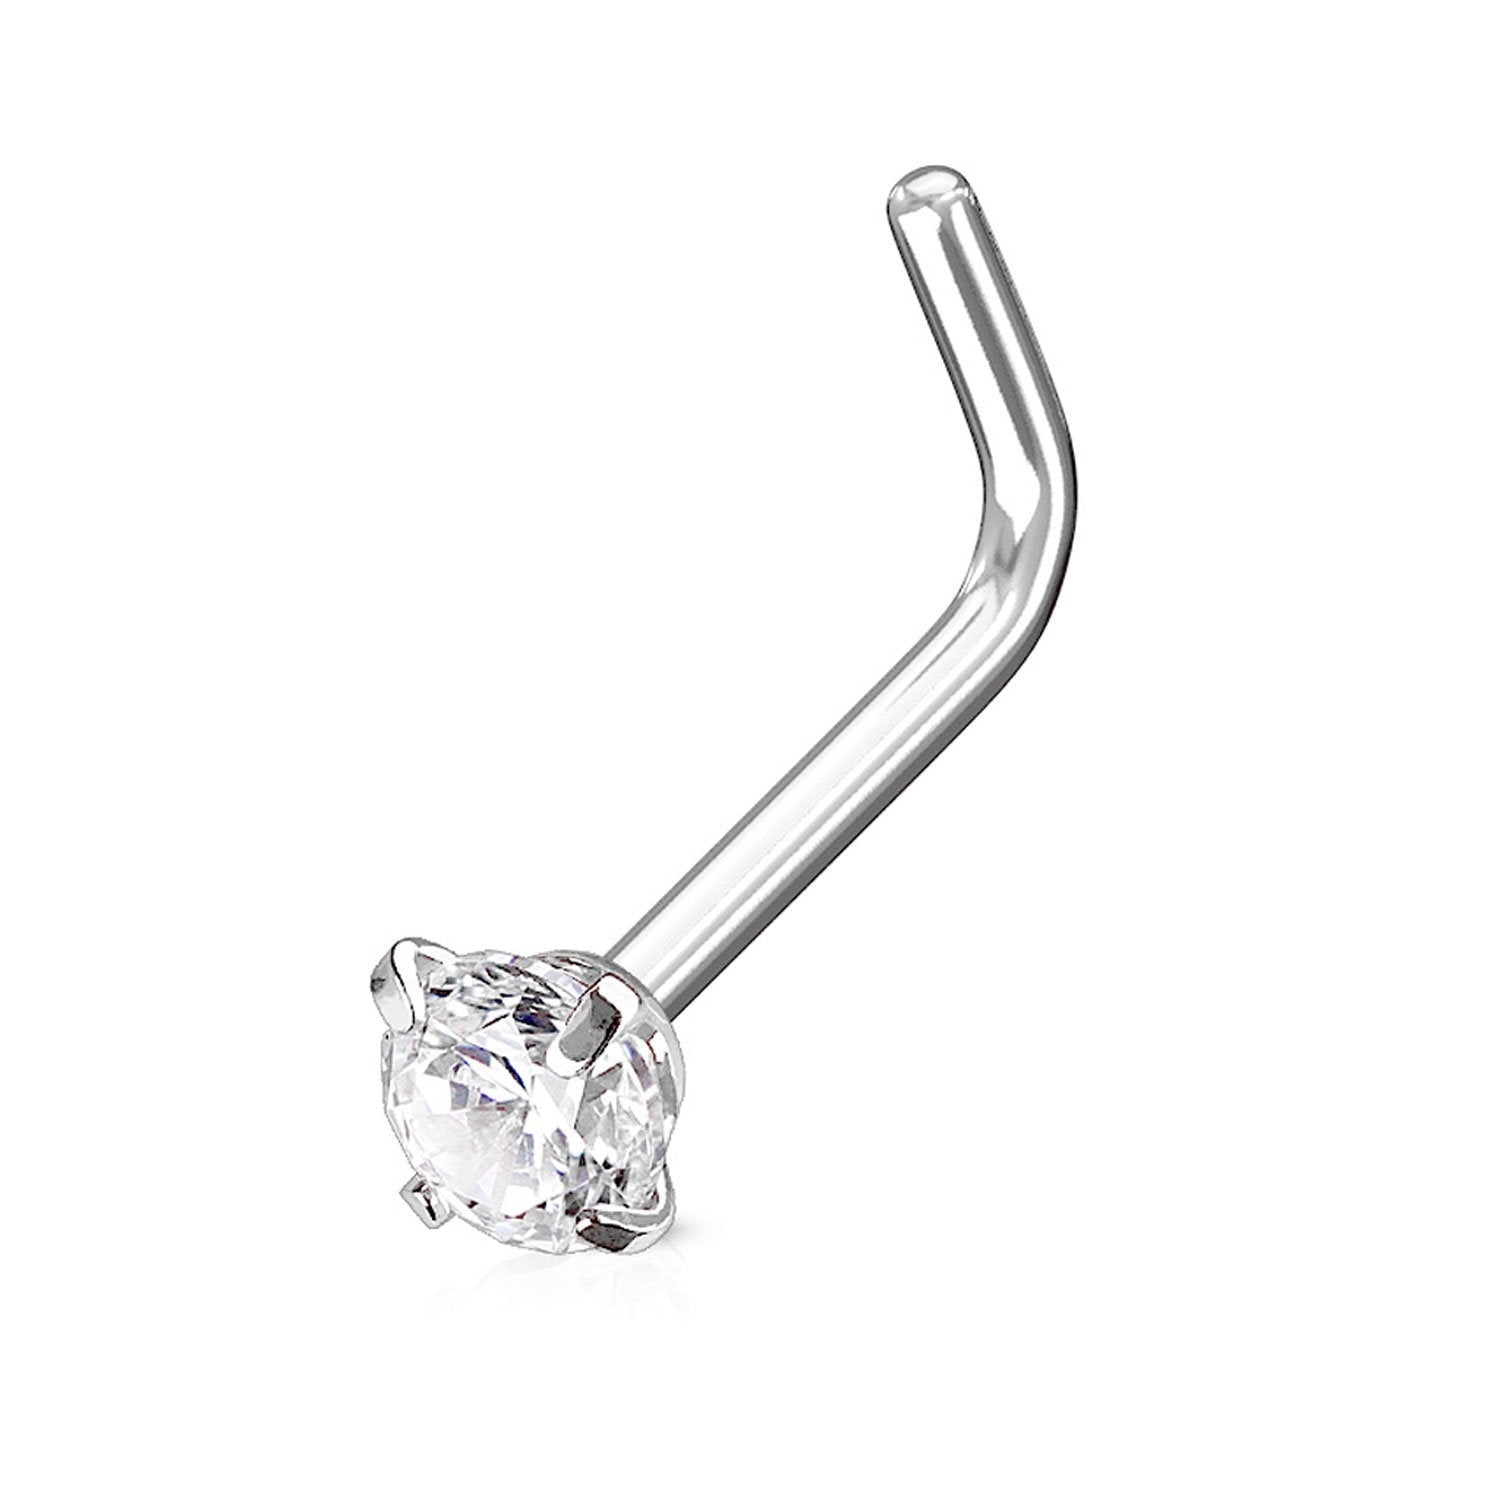 20G (0.8mm) Nose Ring L-Shaped Stud Prong CZ Crystal Stainless S